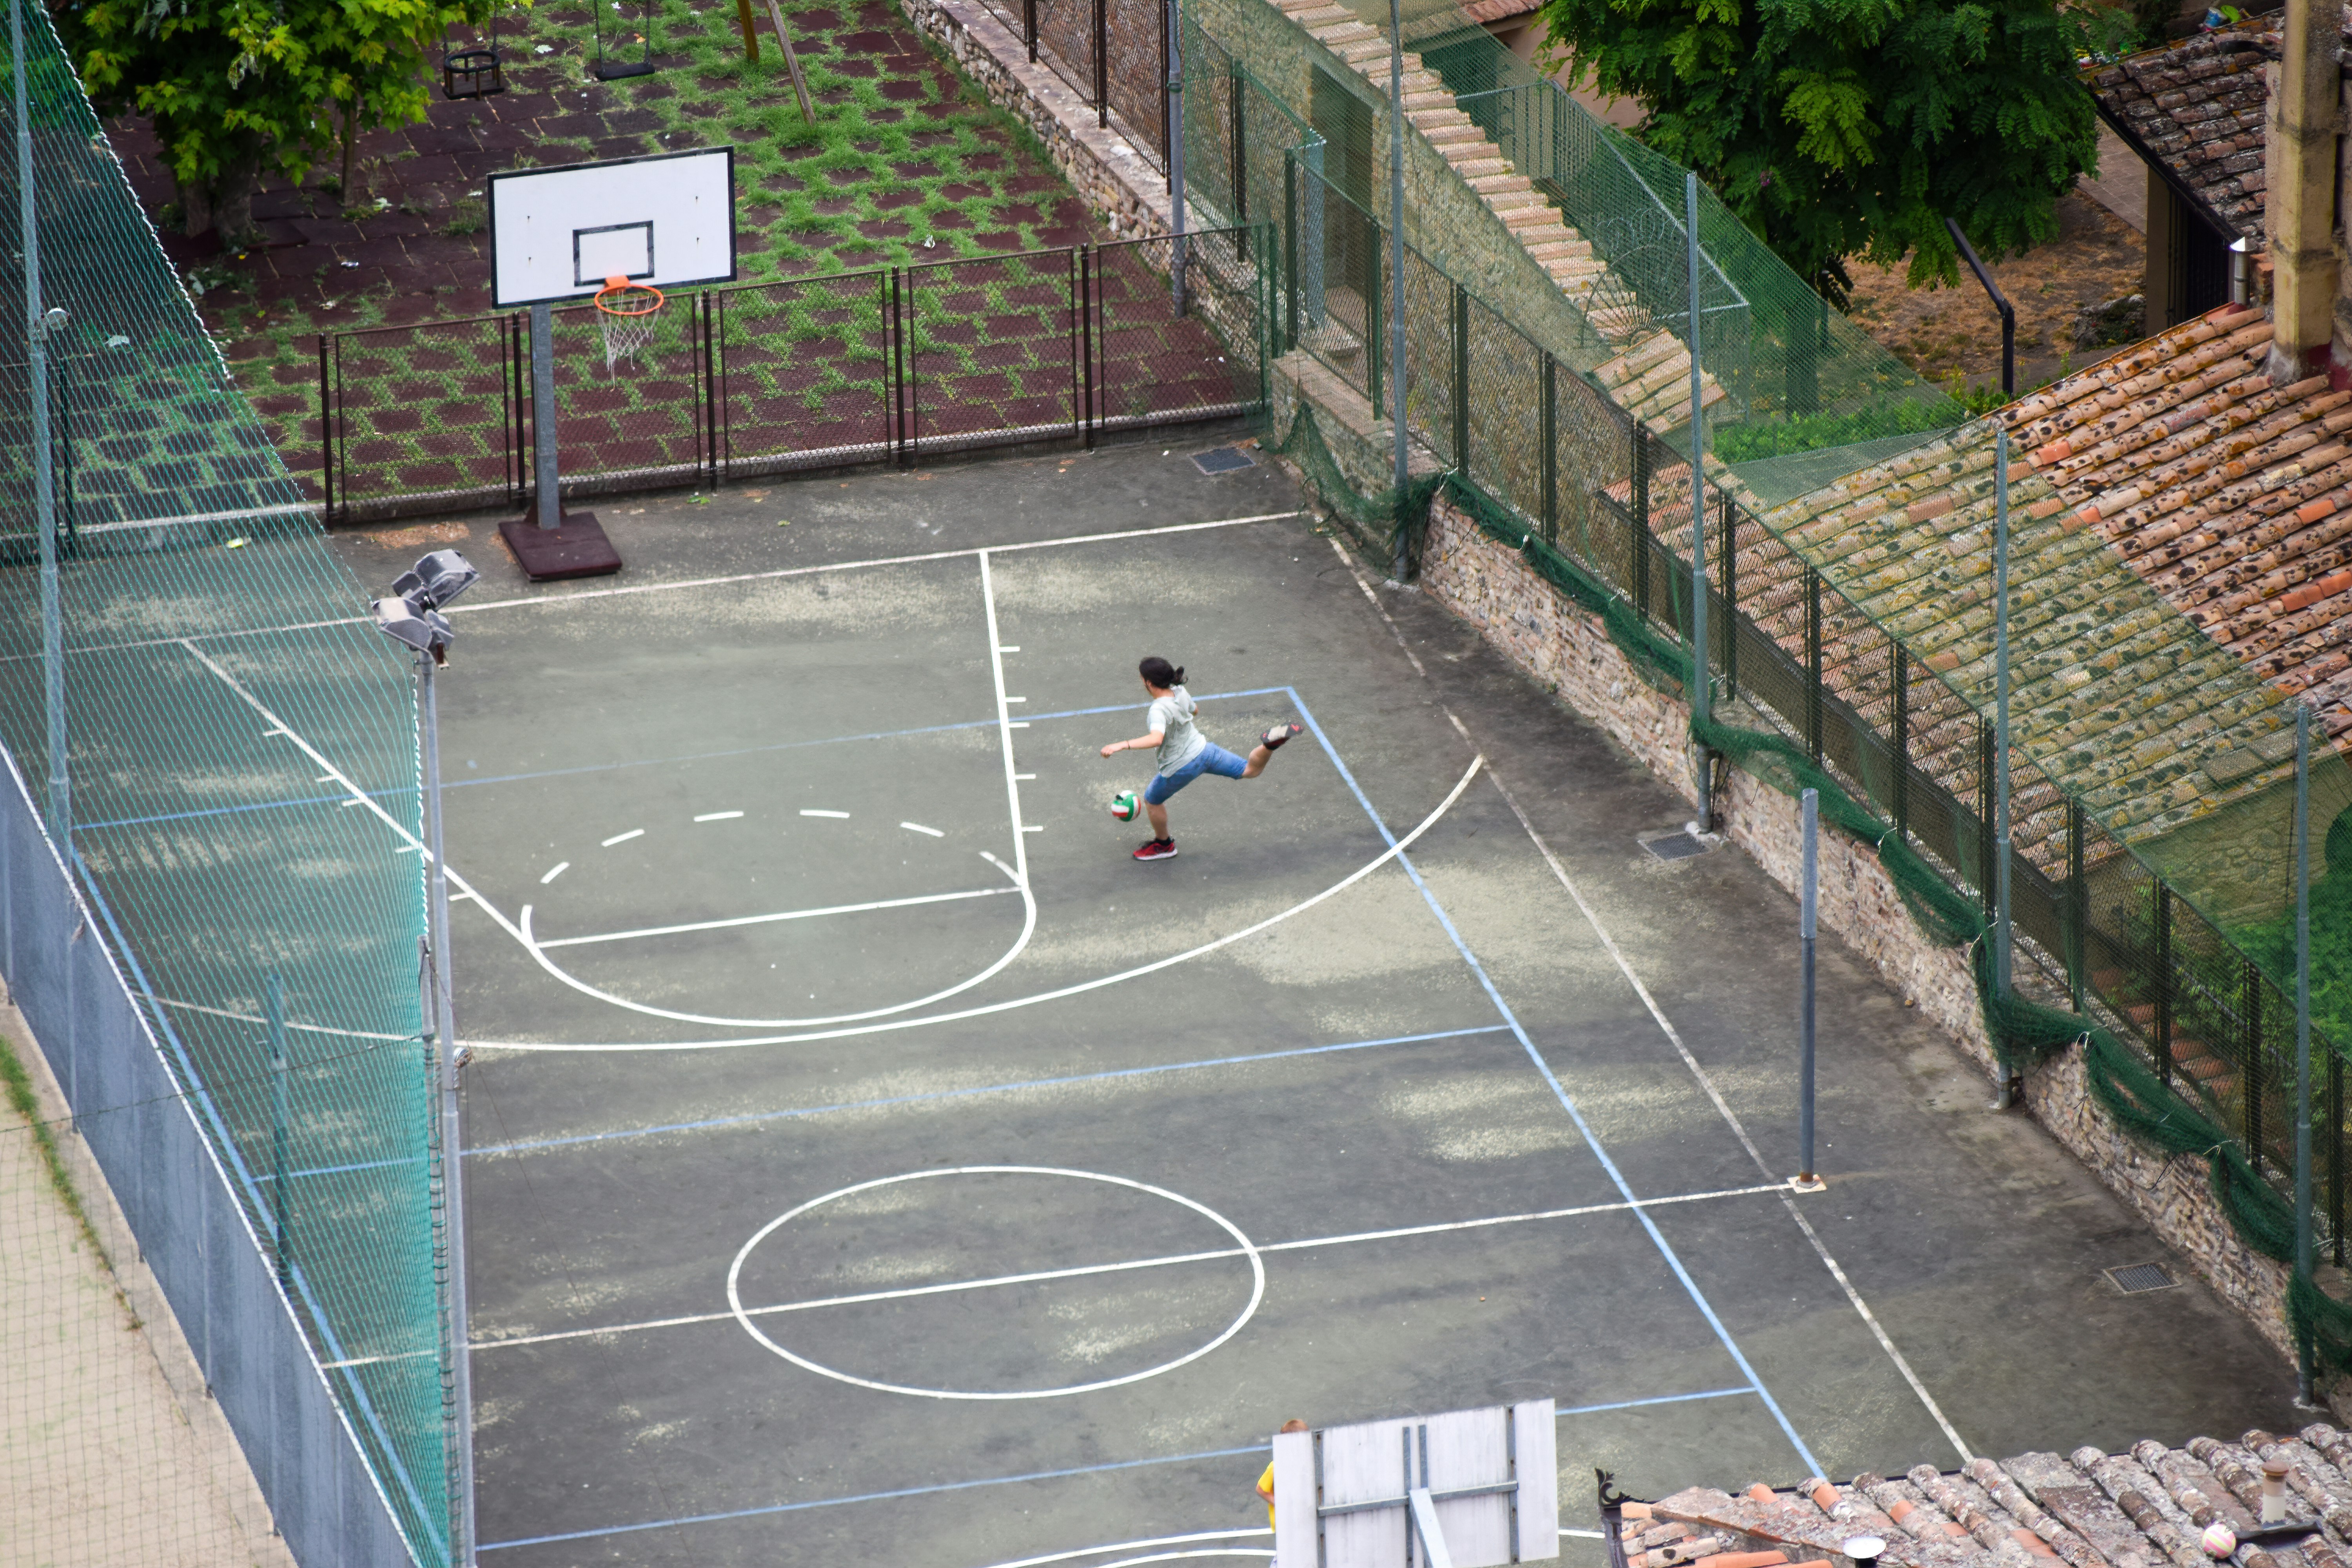 woman in white shirt sitting on basketball court during daytime